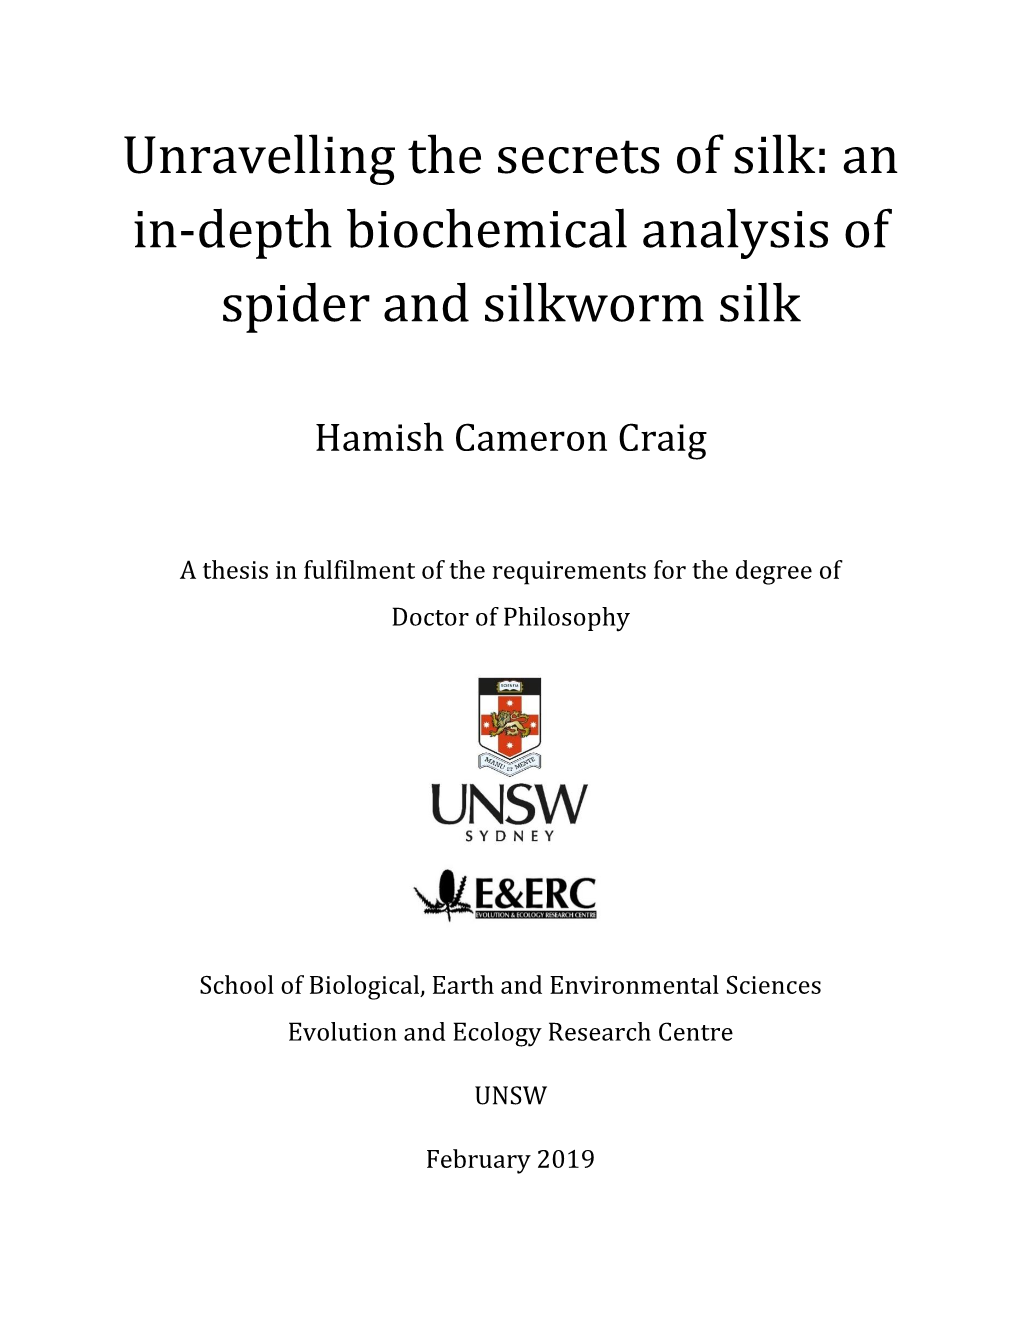 An In-Depth Biochemical Analysis of Spider and Silkworm Silk